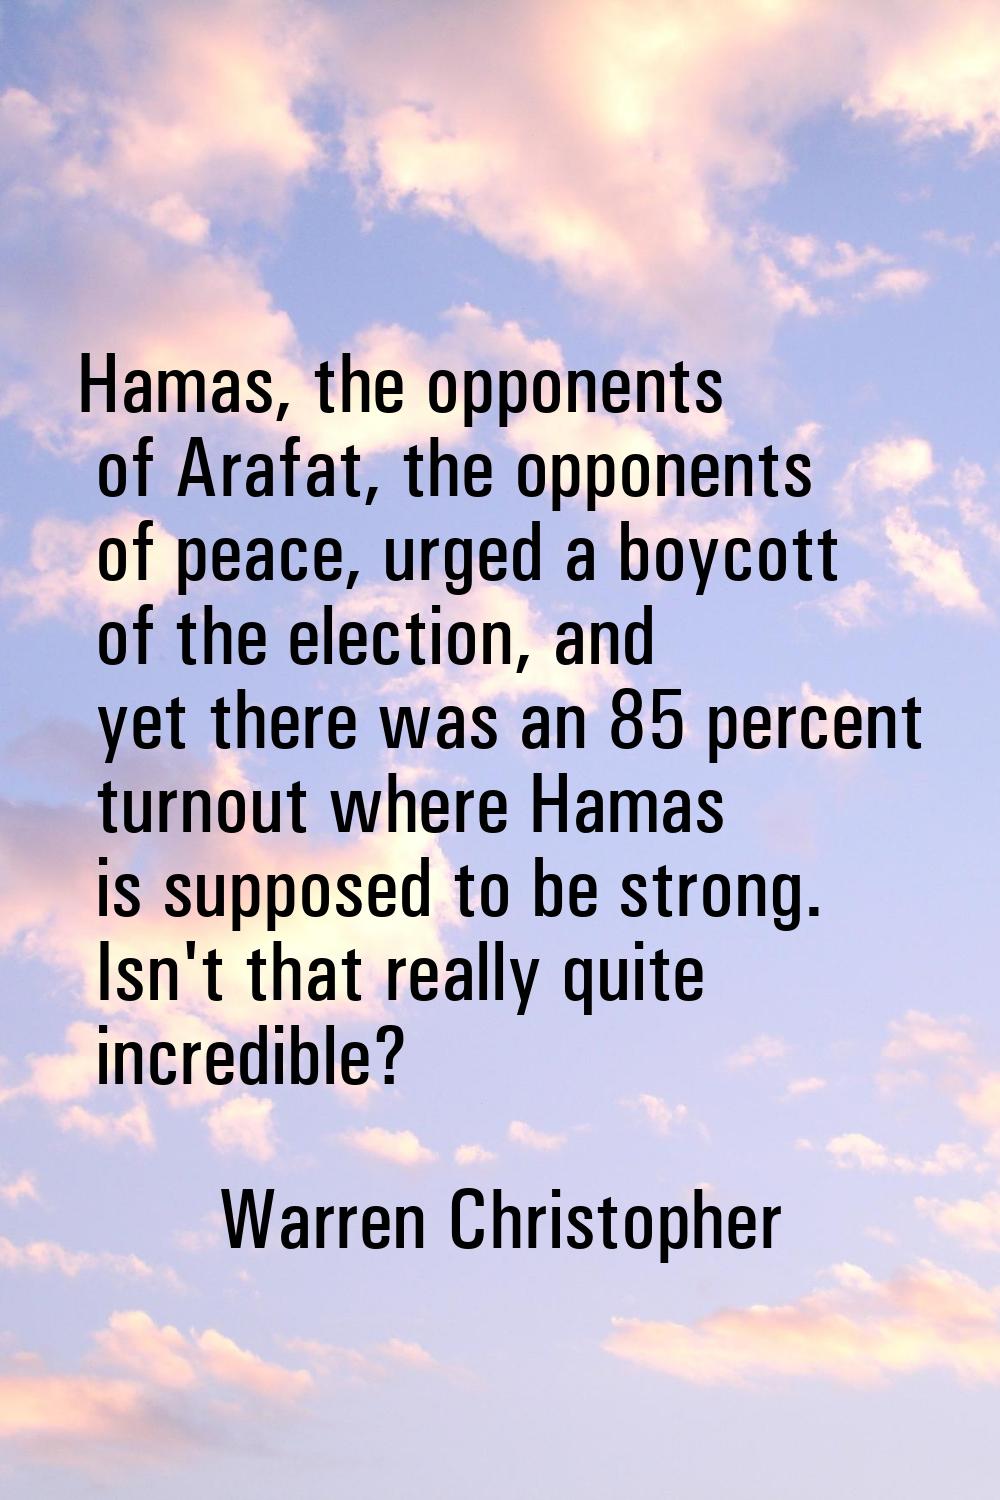 Hamas, the opponents of Arafat, the opponents of peace, urged a boycott of the election, and yet th